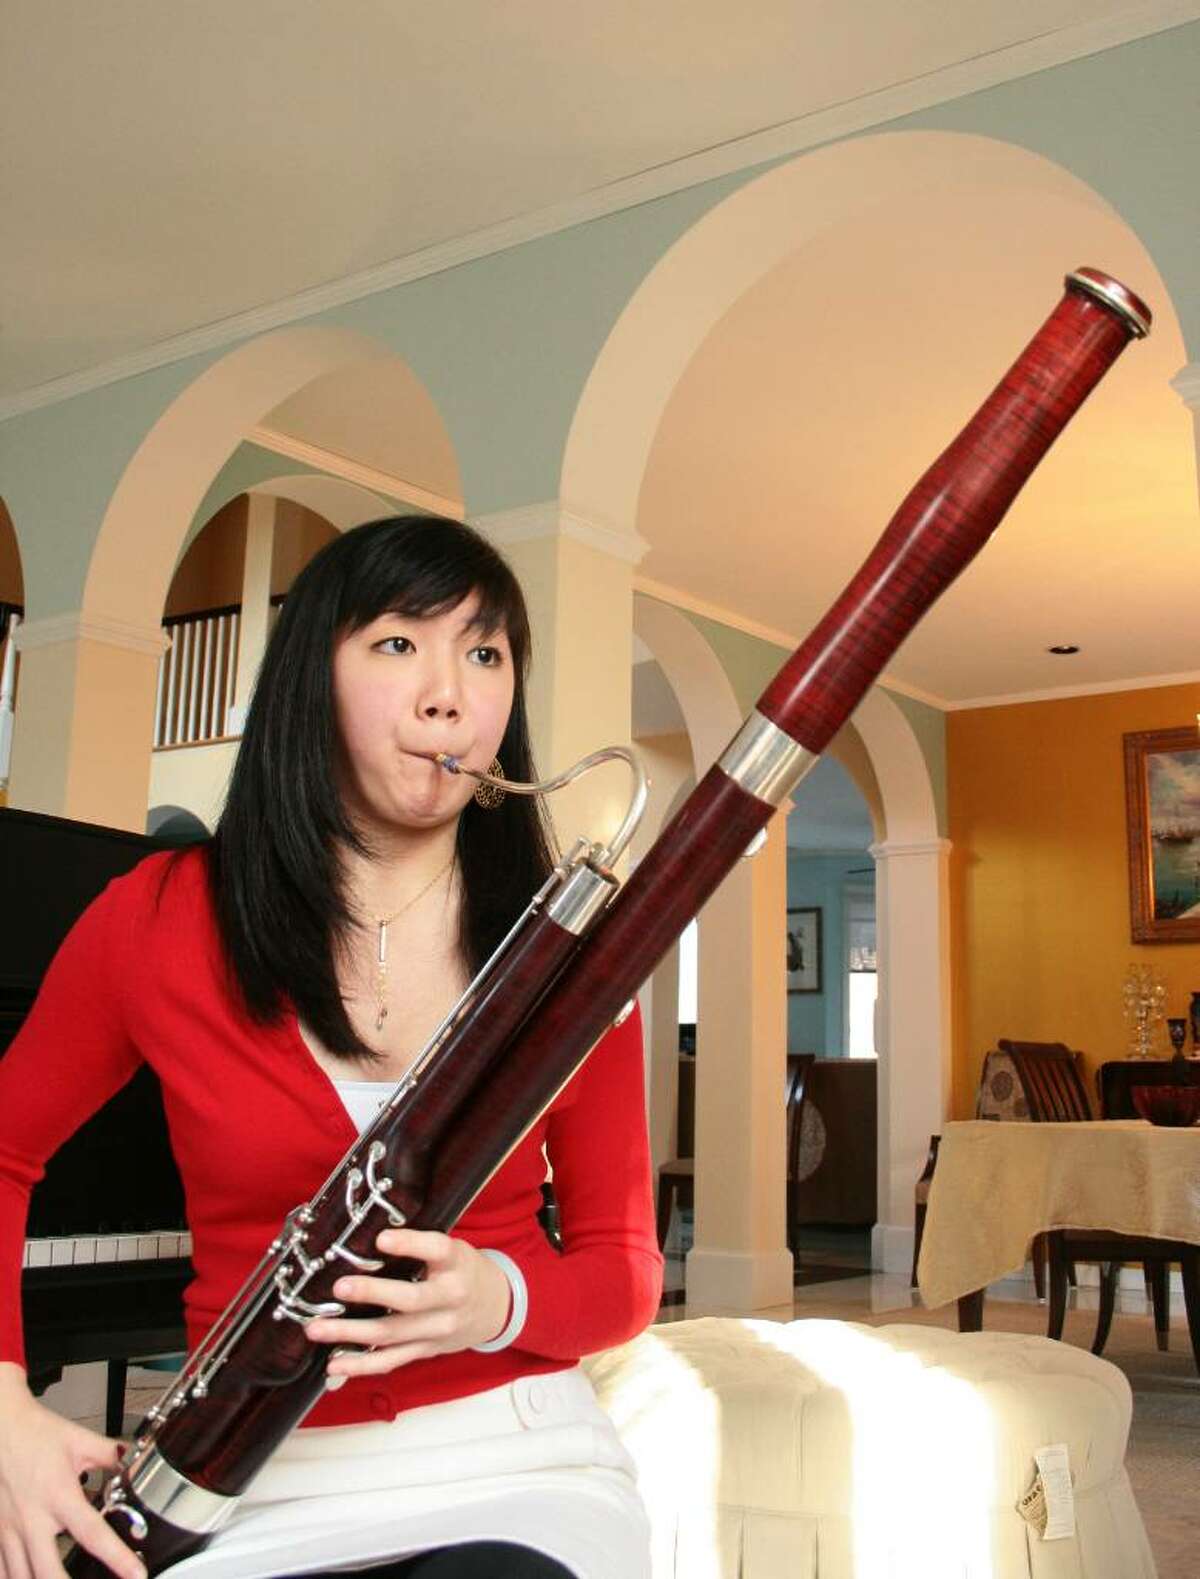 Catherine Chen, a senior at Greenwich High School shown practicing on the bassoon, will compete in the final round of "The President's Own" U.S. Marine Band's Concerto Competition today in Washington, D.C.